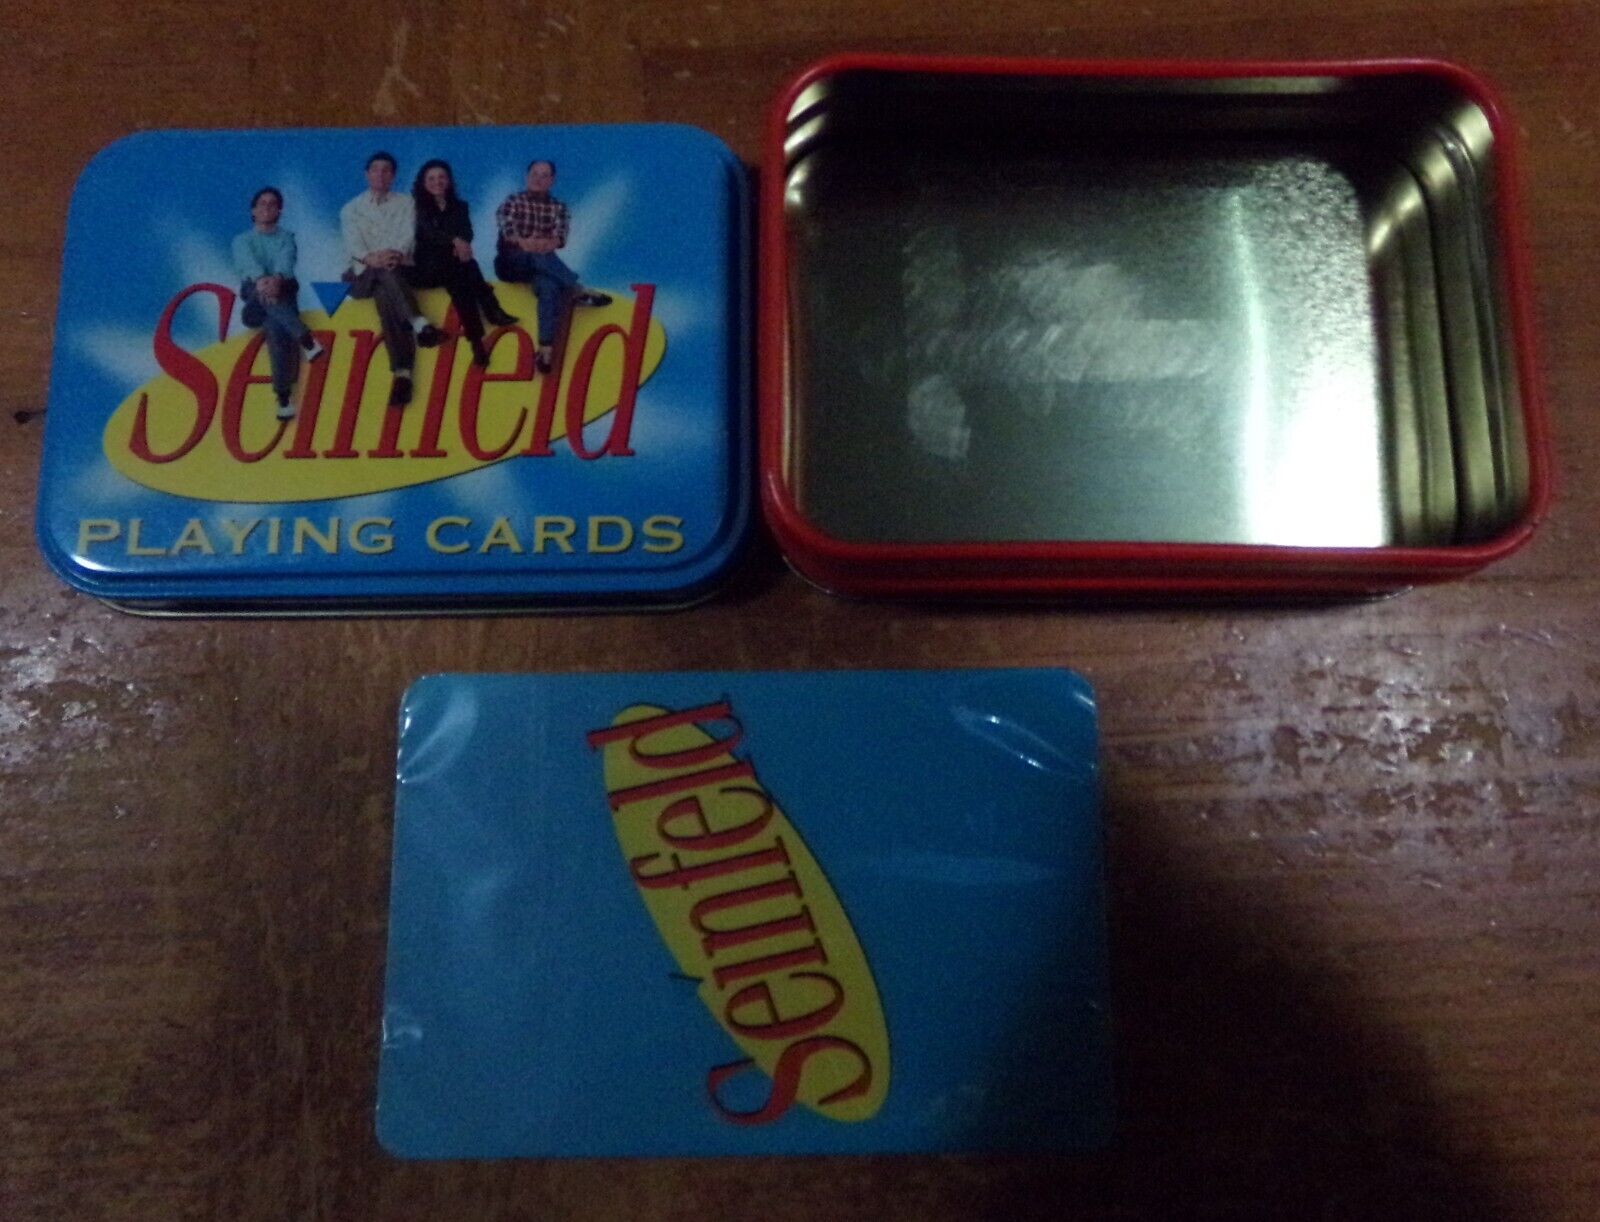 2004 Seinfeld TV Series Deck of Playing Cards In Tin Container - Sealed CTHE